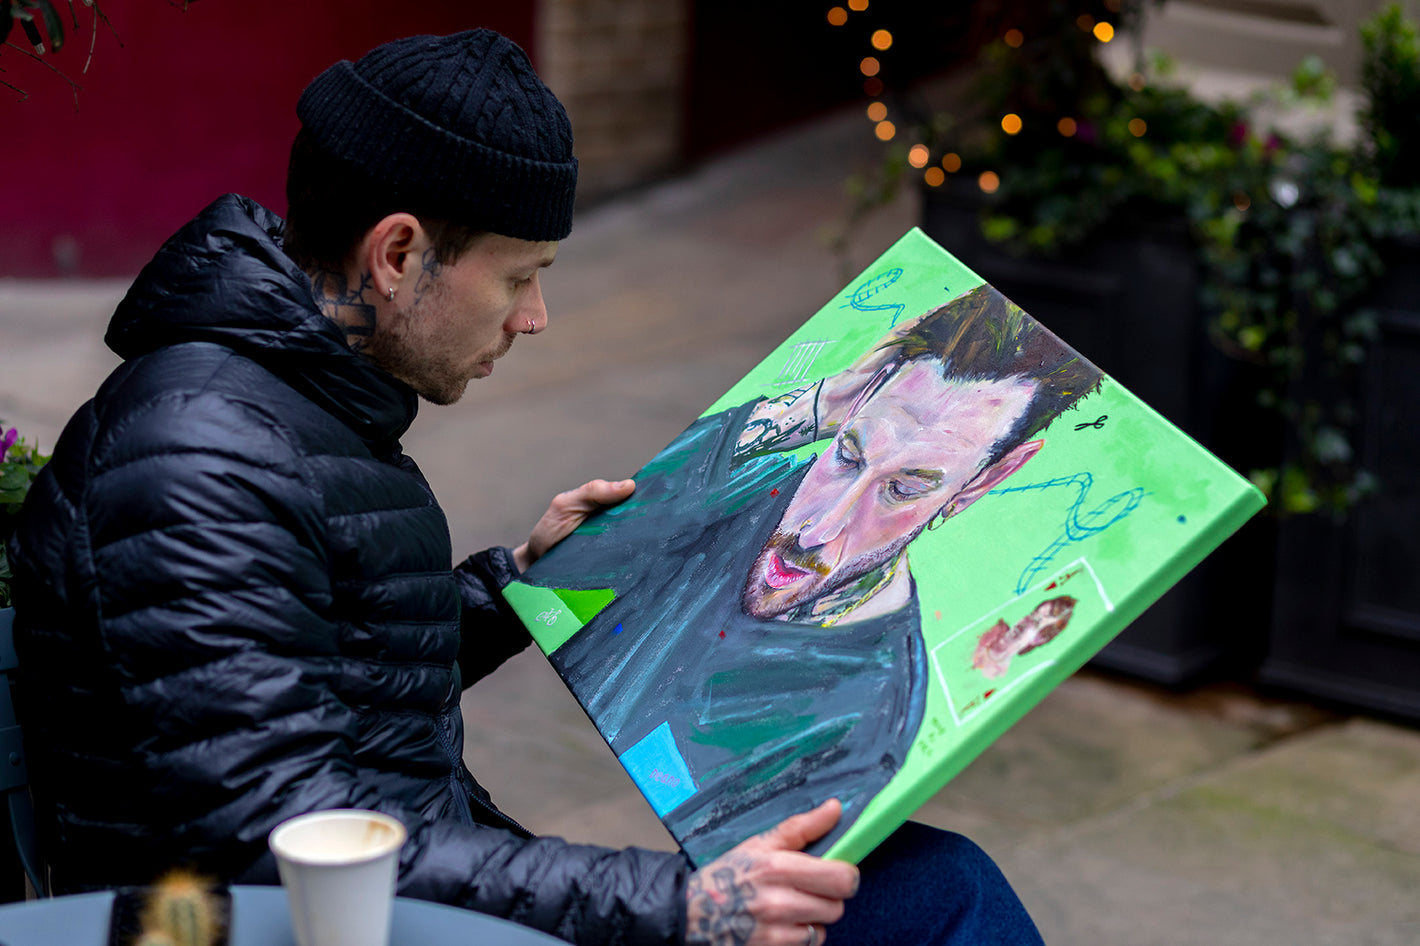  Ben from The New Normal Charity sitting on a chair next to a table with a cup of coffee, looking at his commissioned portrait with a focused expression.